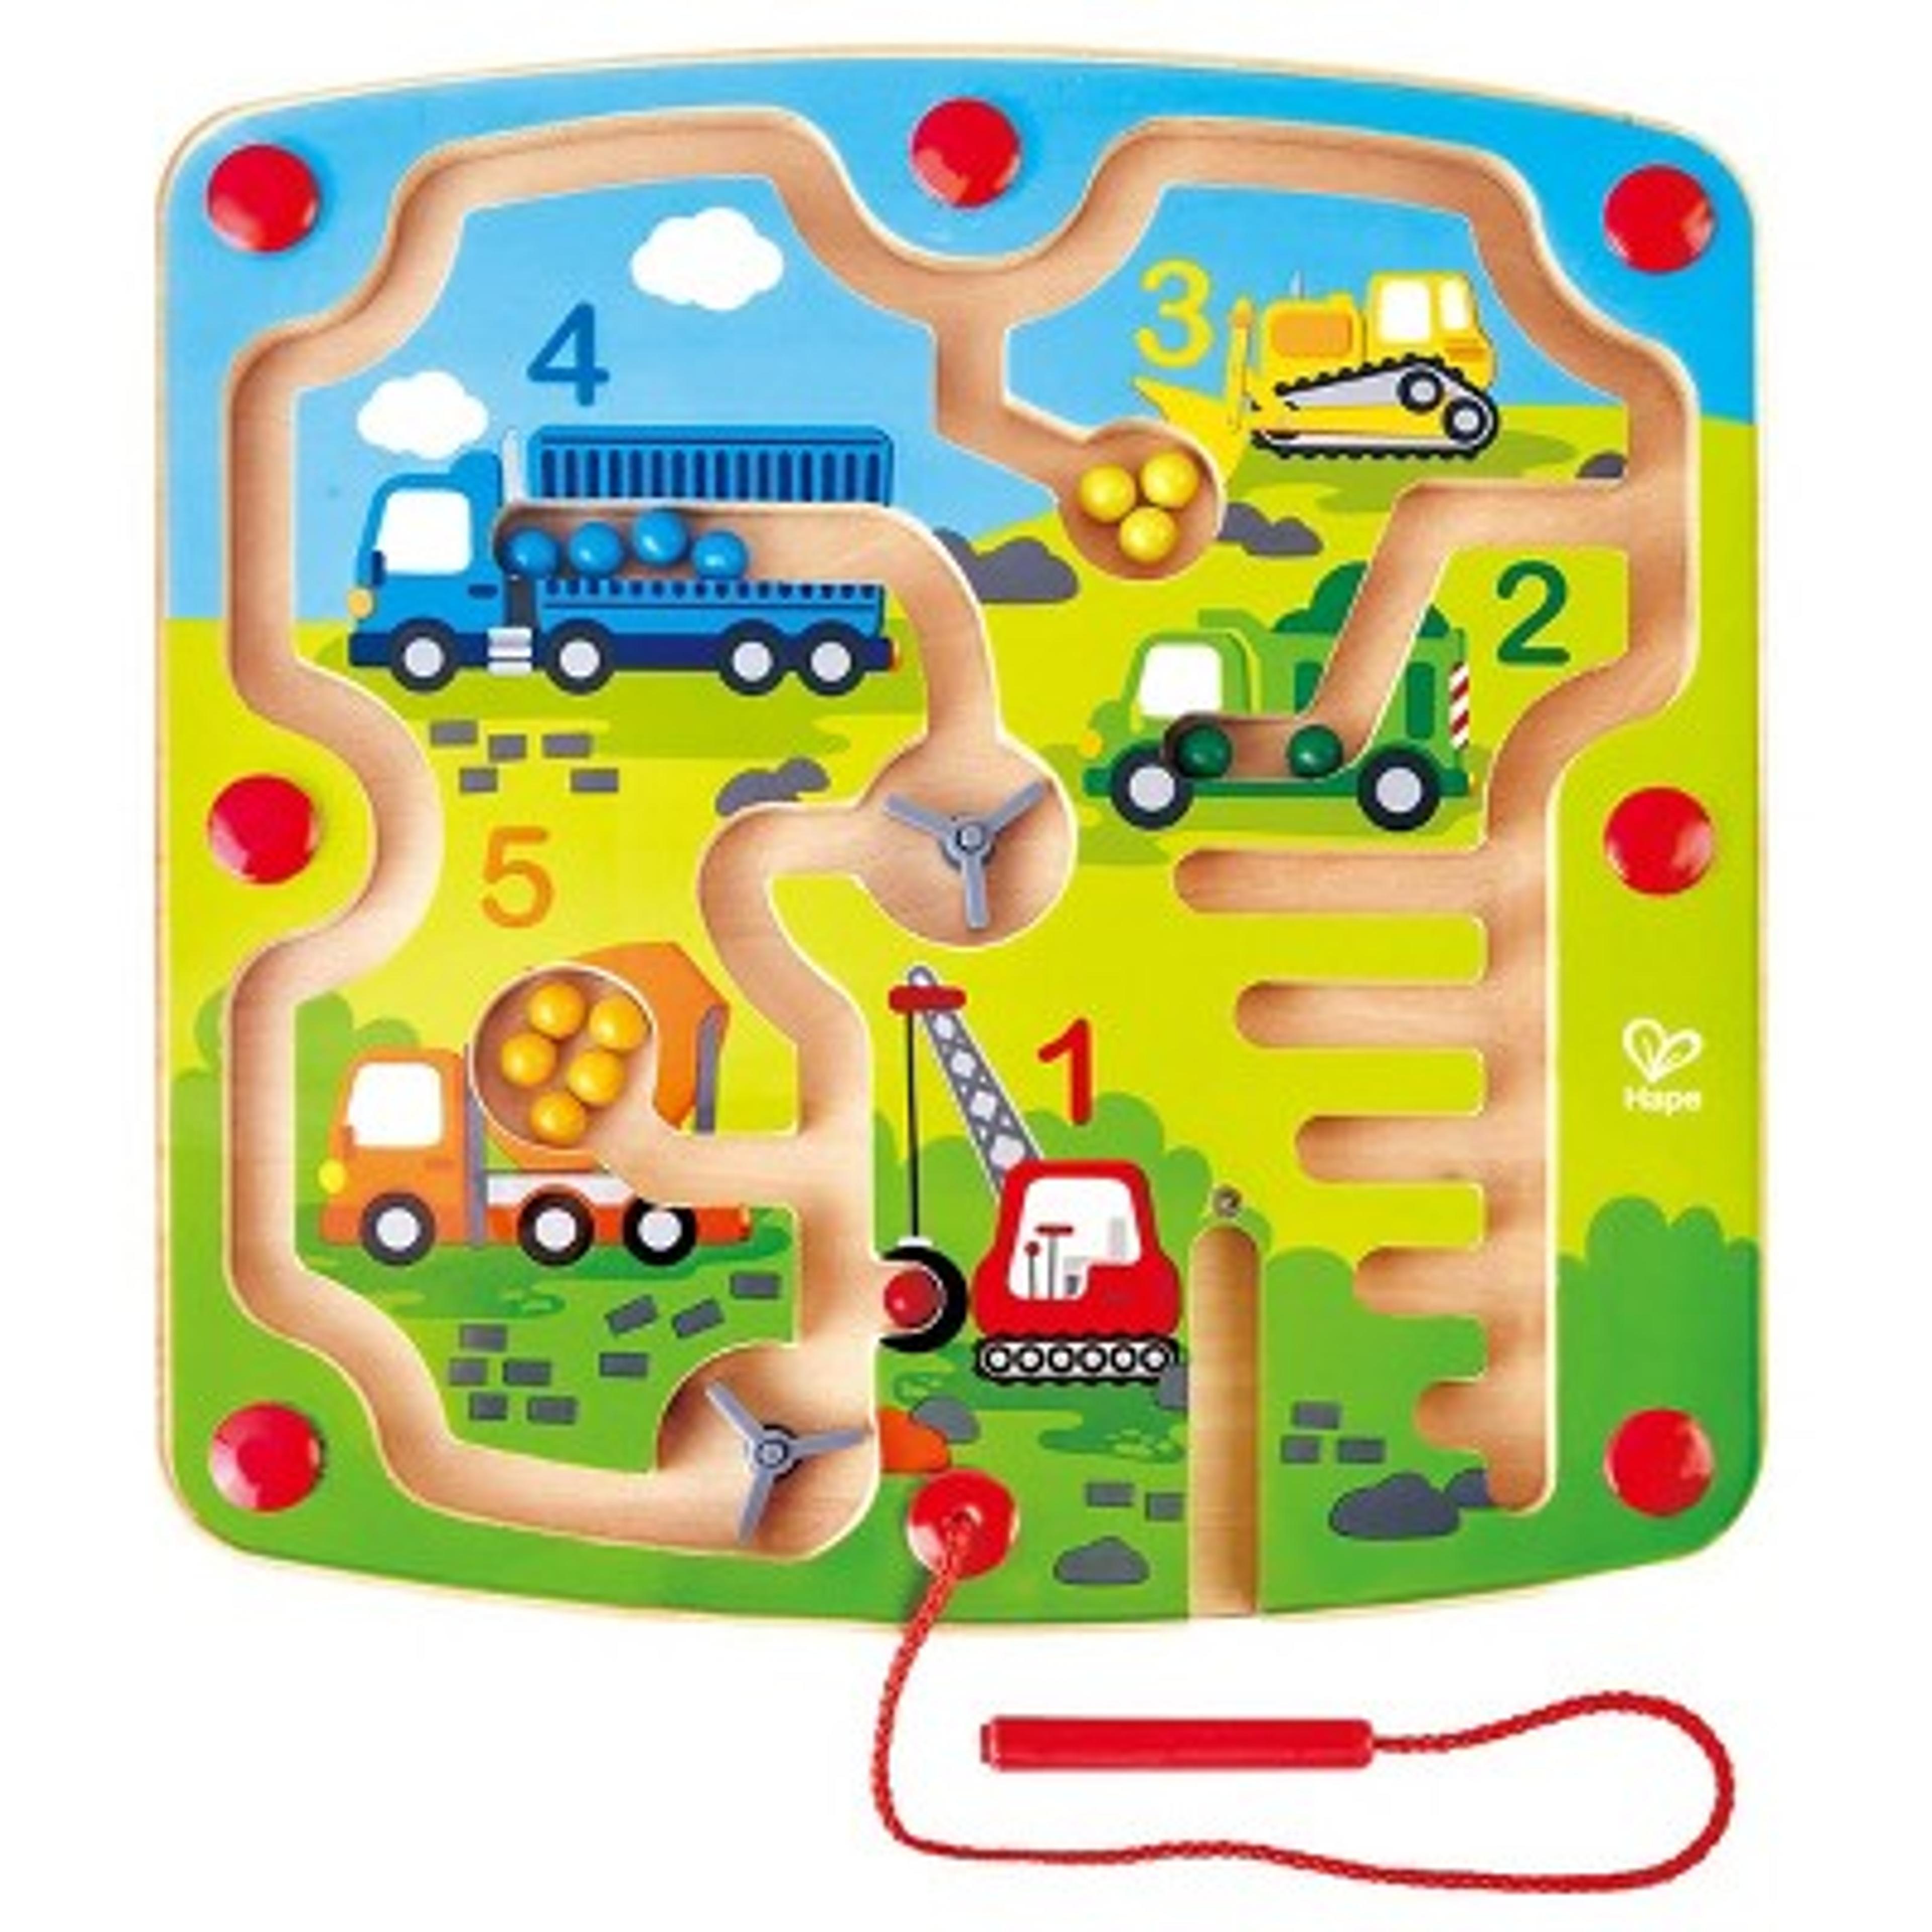 Hape Wooden Construction And Number Magnetic Maze : Target